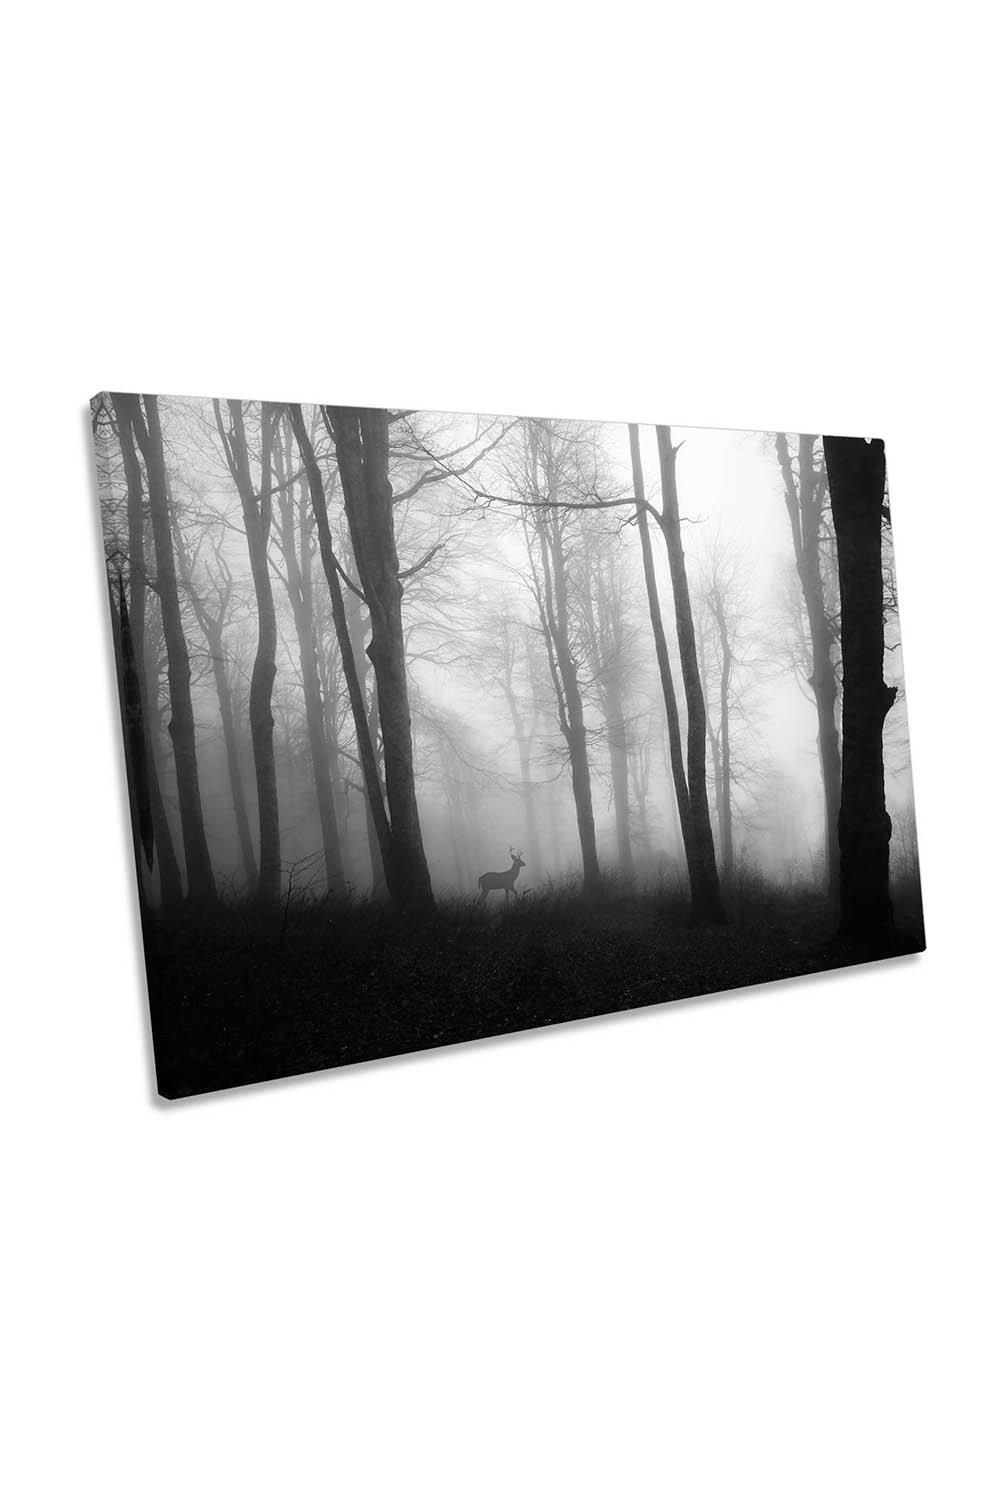 Misty Forest Stag Wildlife Moody Canvas Wall Art Picture Print